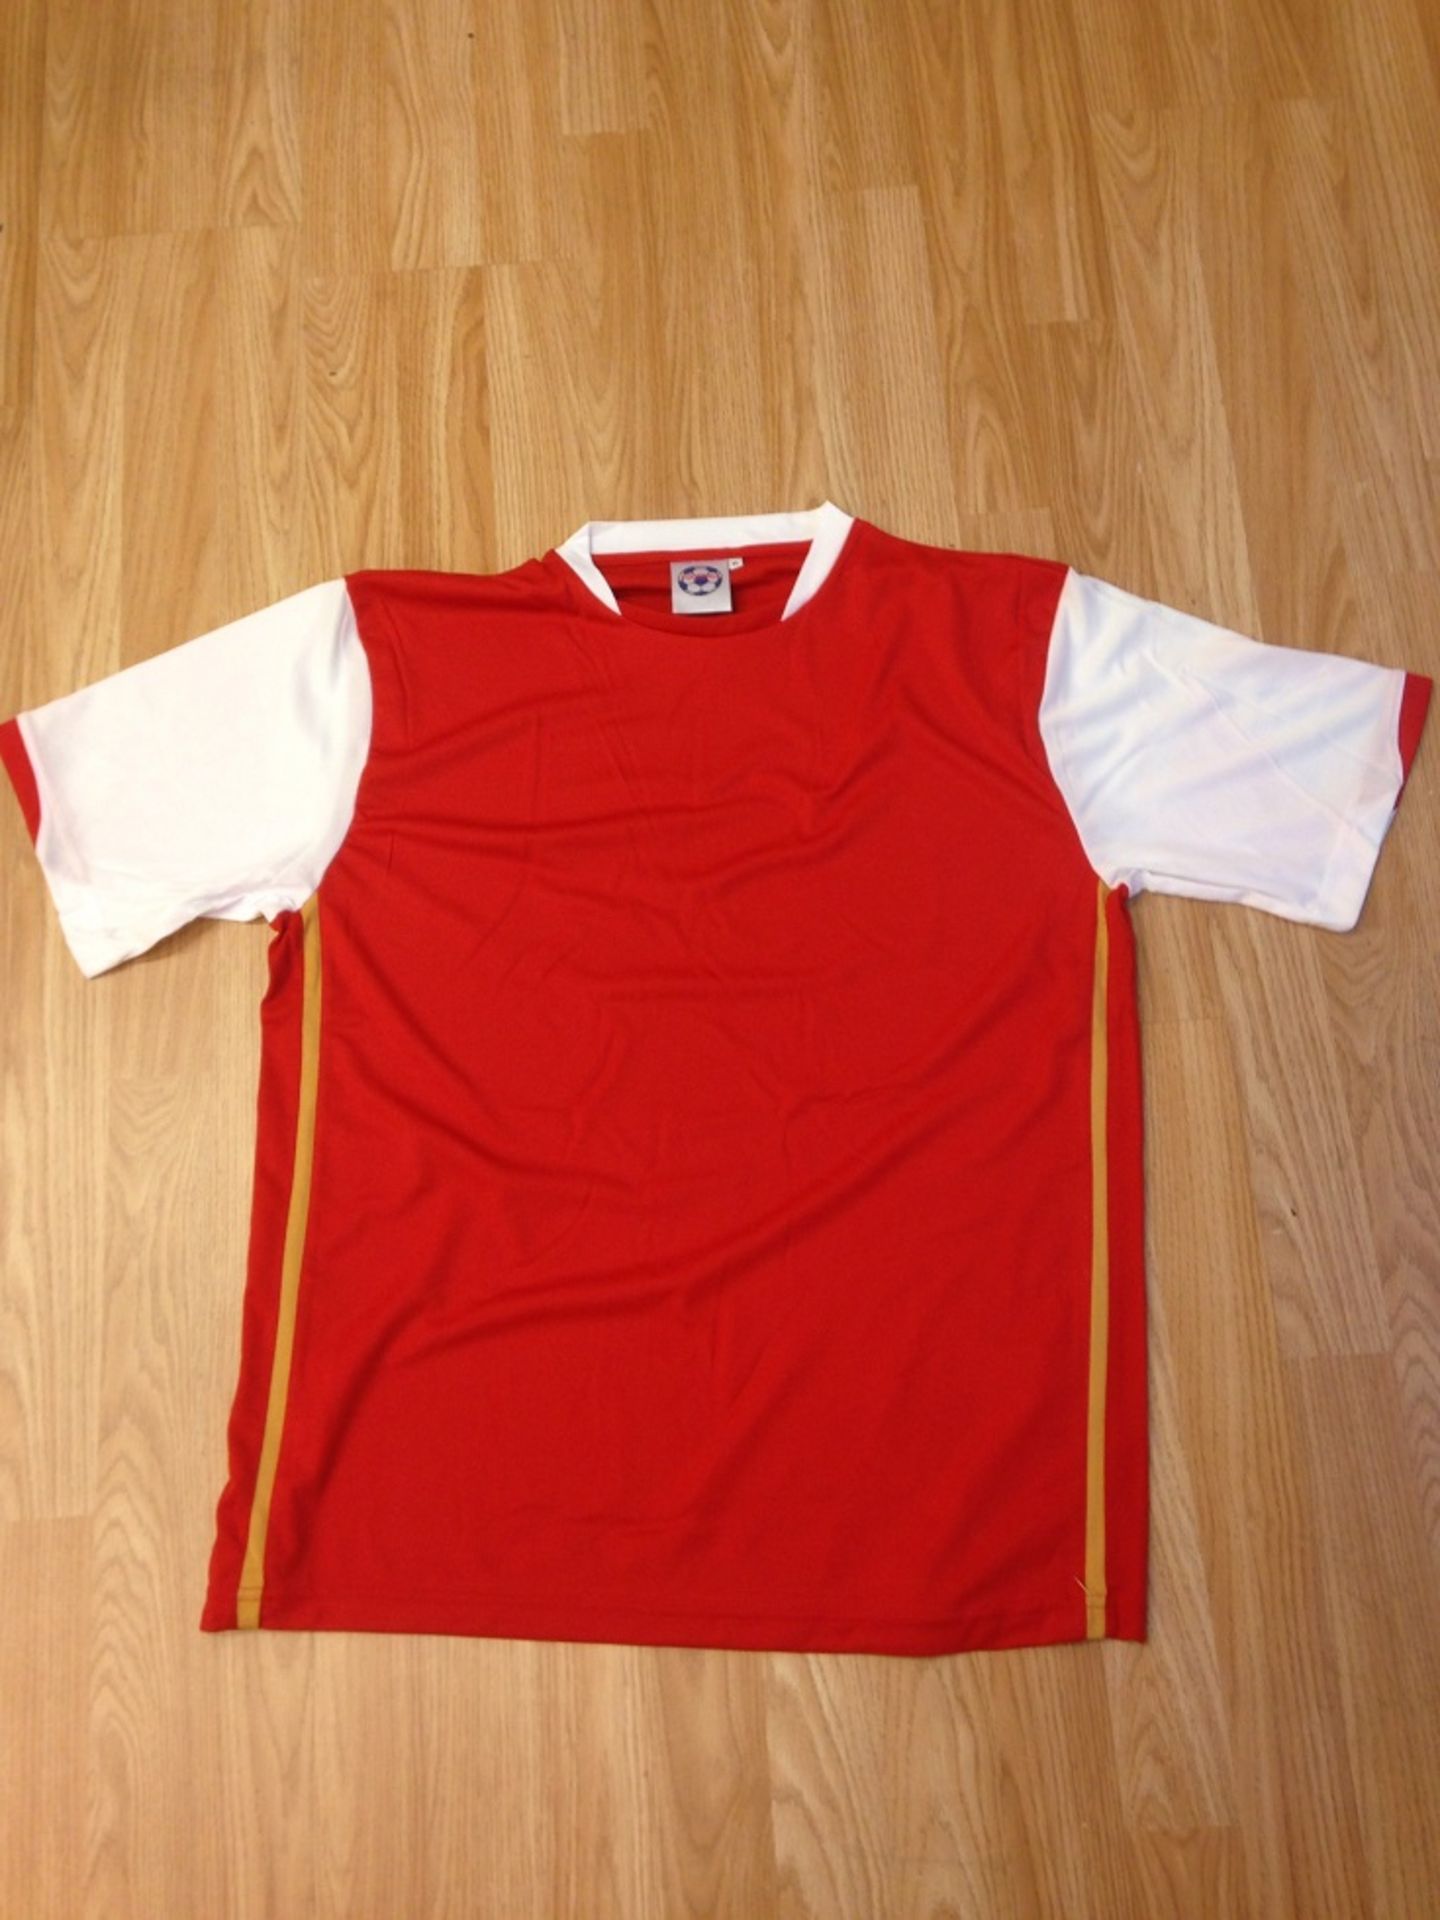 10 X BRAND NEW BAGGED RED WITH GOLD SIDE STRIPE FOOTBALL TOPS SIZE L